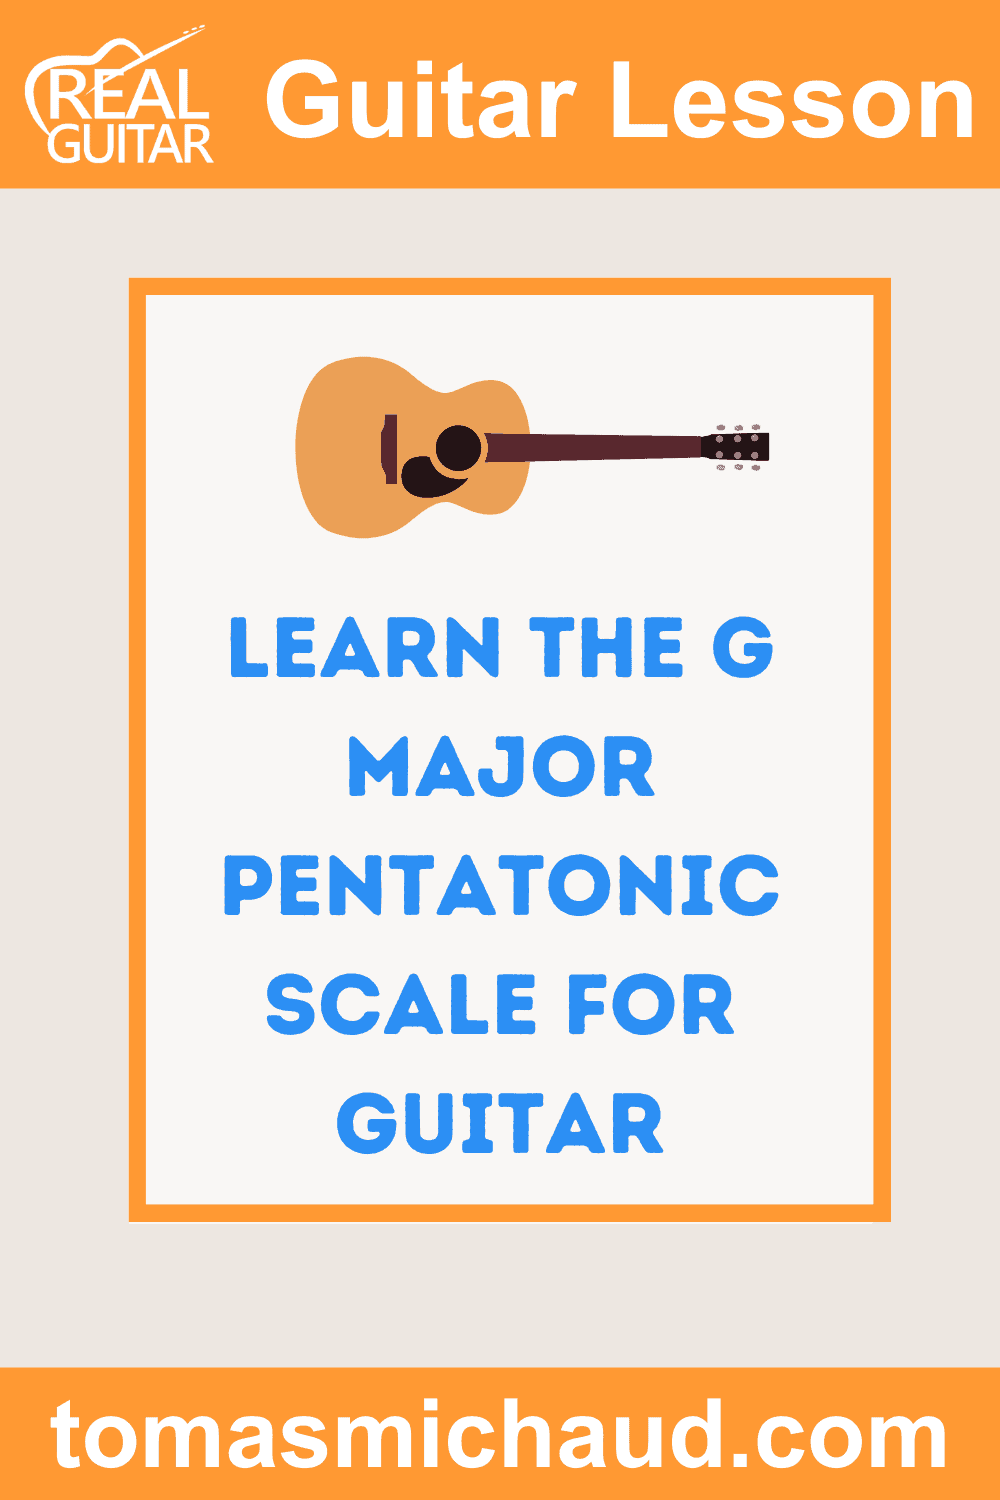 Learn the G Major Pentatonic Scale For Guitar